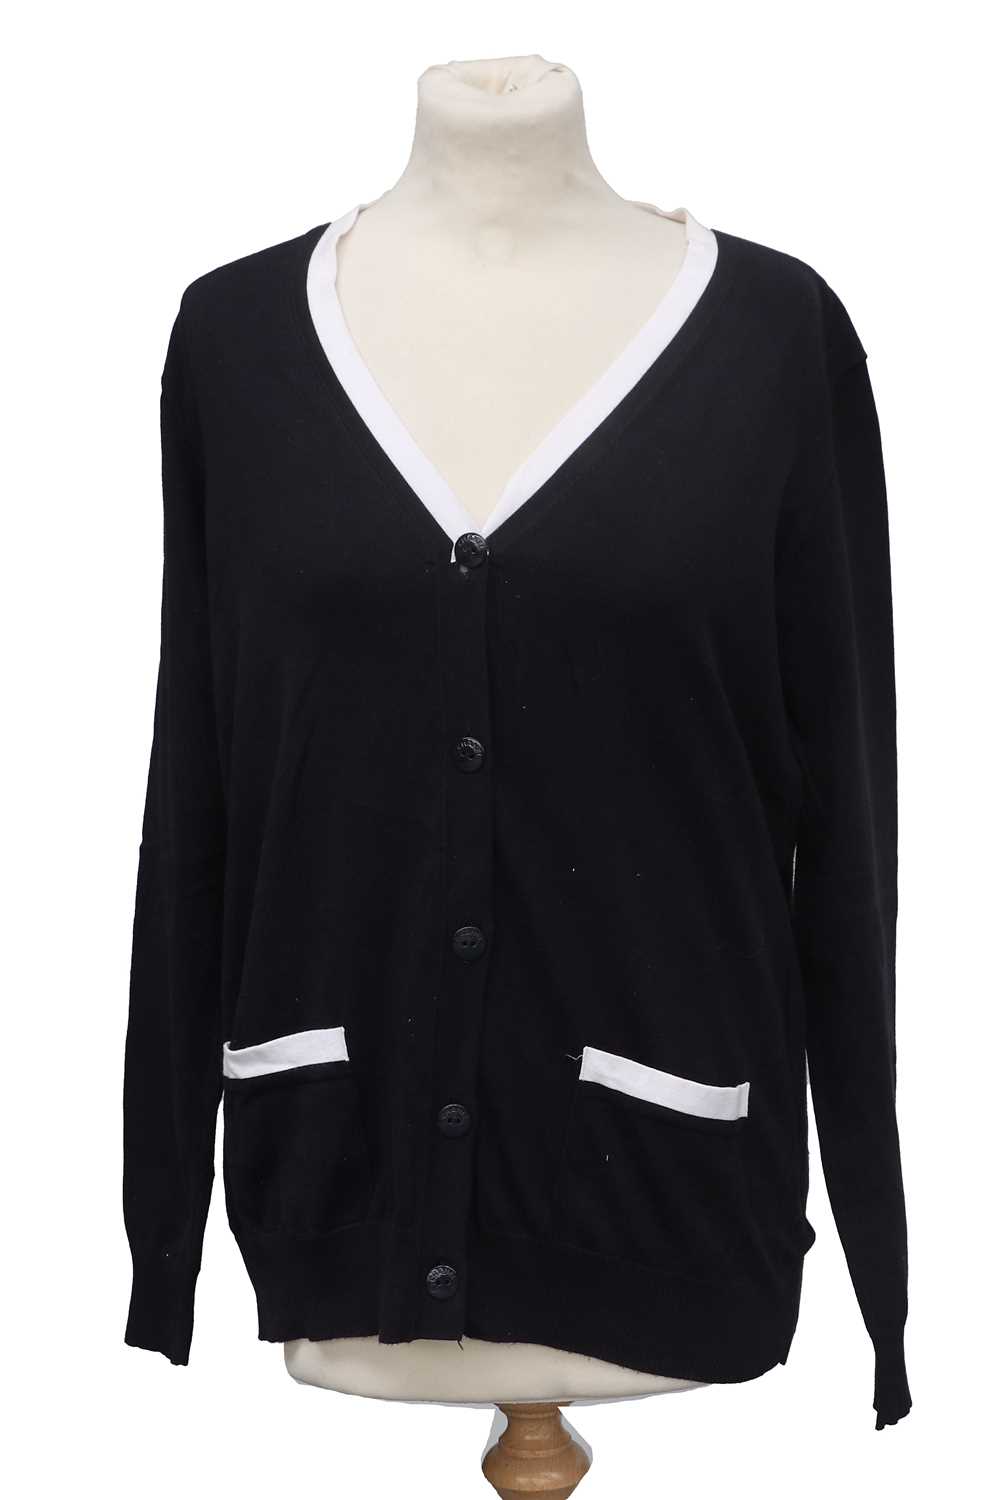 Chanel Uniforms, comprising two black and white cotton twinsets, the cardigans with front pockets - Image 3 of 9